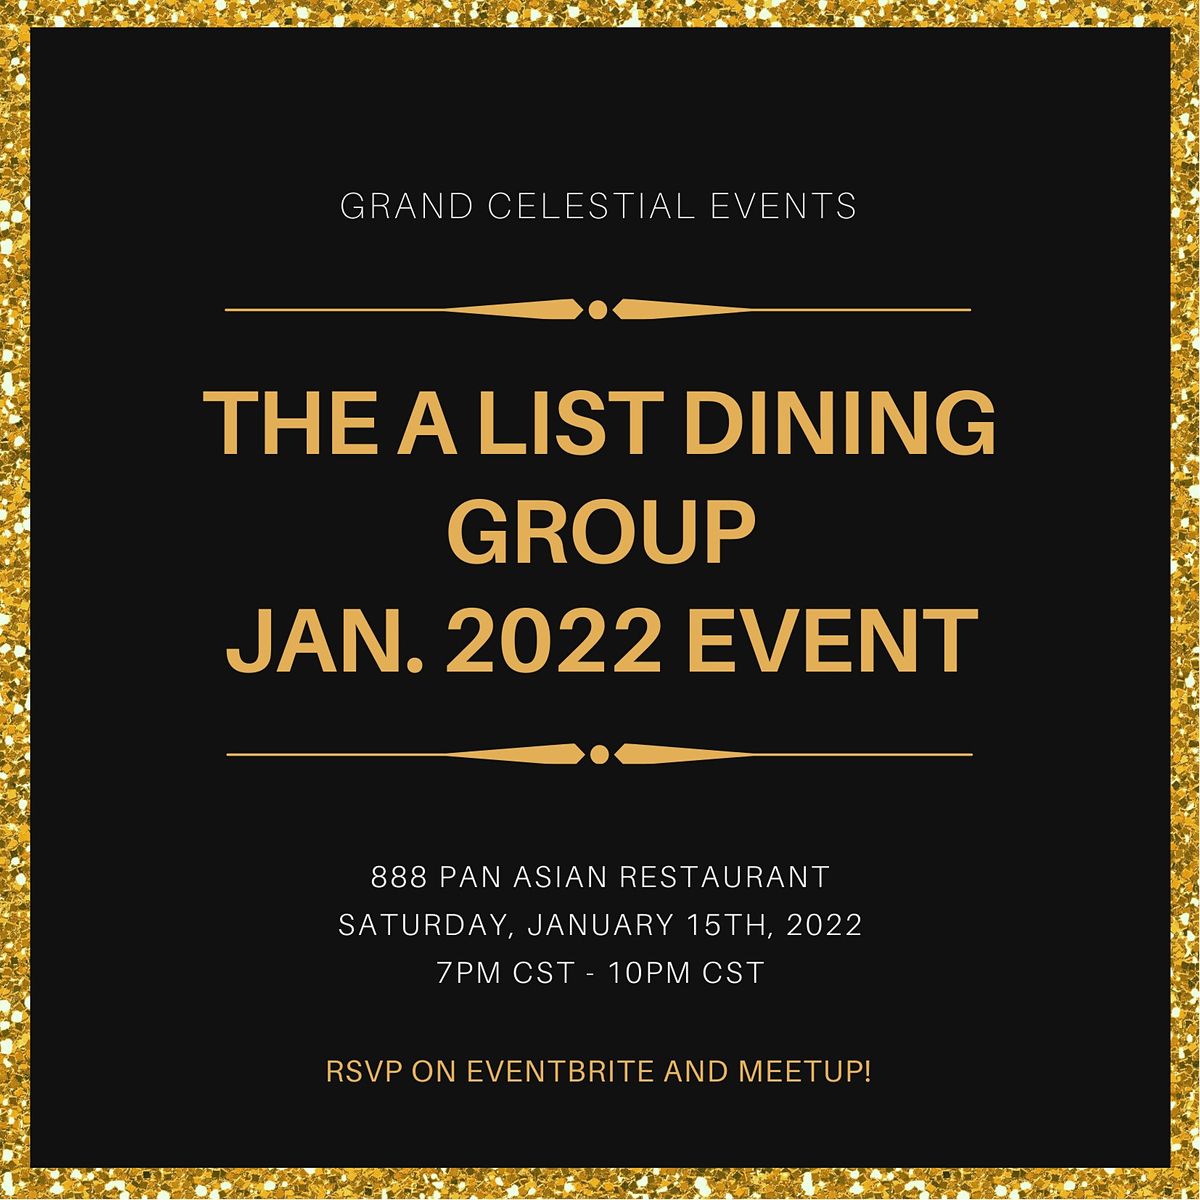 The A List Dining Group, January 2022 Event: 888 Pan Asian Restaurant